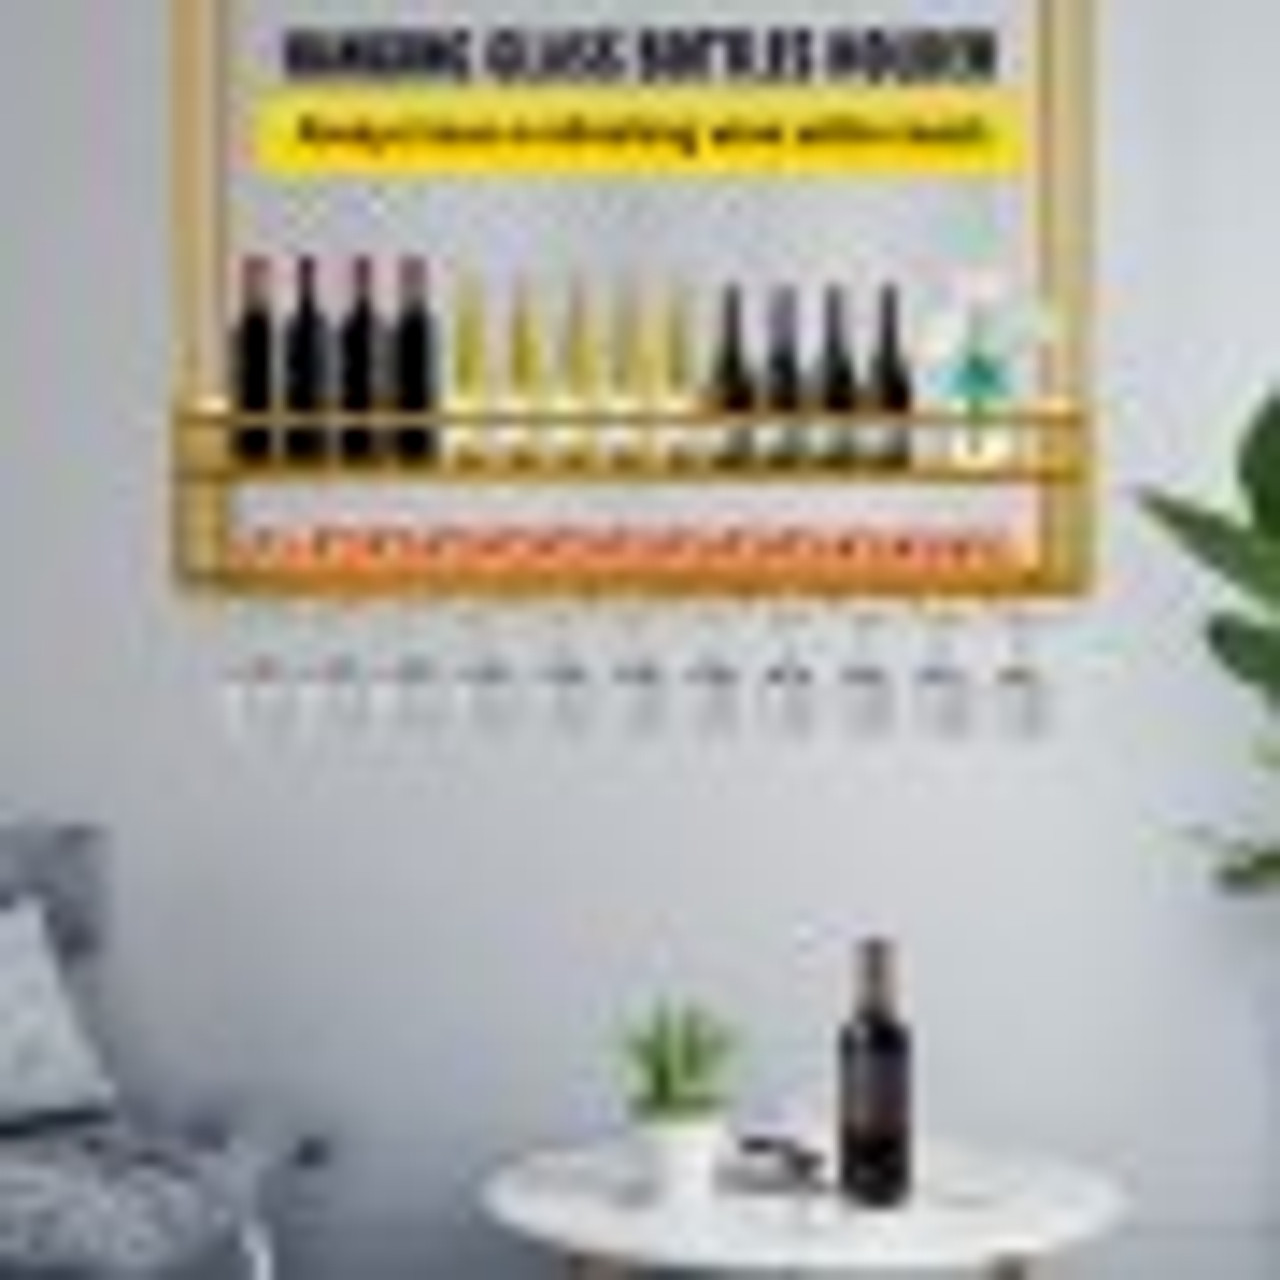 Ceiling Wine Glass Rack, 46.9 x 11.8 inch Hanging Wine Glass Rack, 18.9-35.8 inch Height Adjustable Hanging Wine Rack Cabinet, Gold Wall-Mounted Wine Glass Rack Perfect for Bar Cafe Kitchen